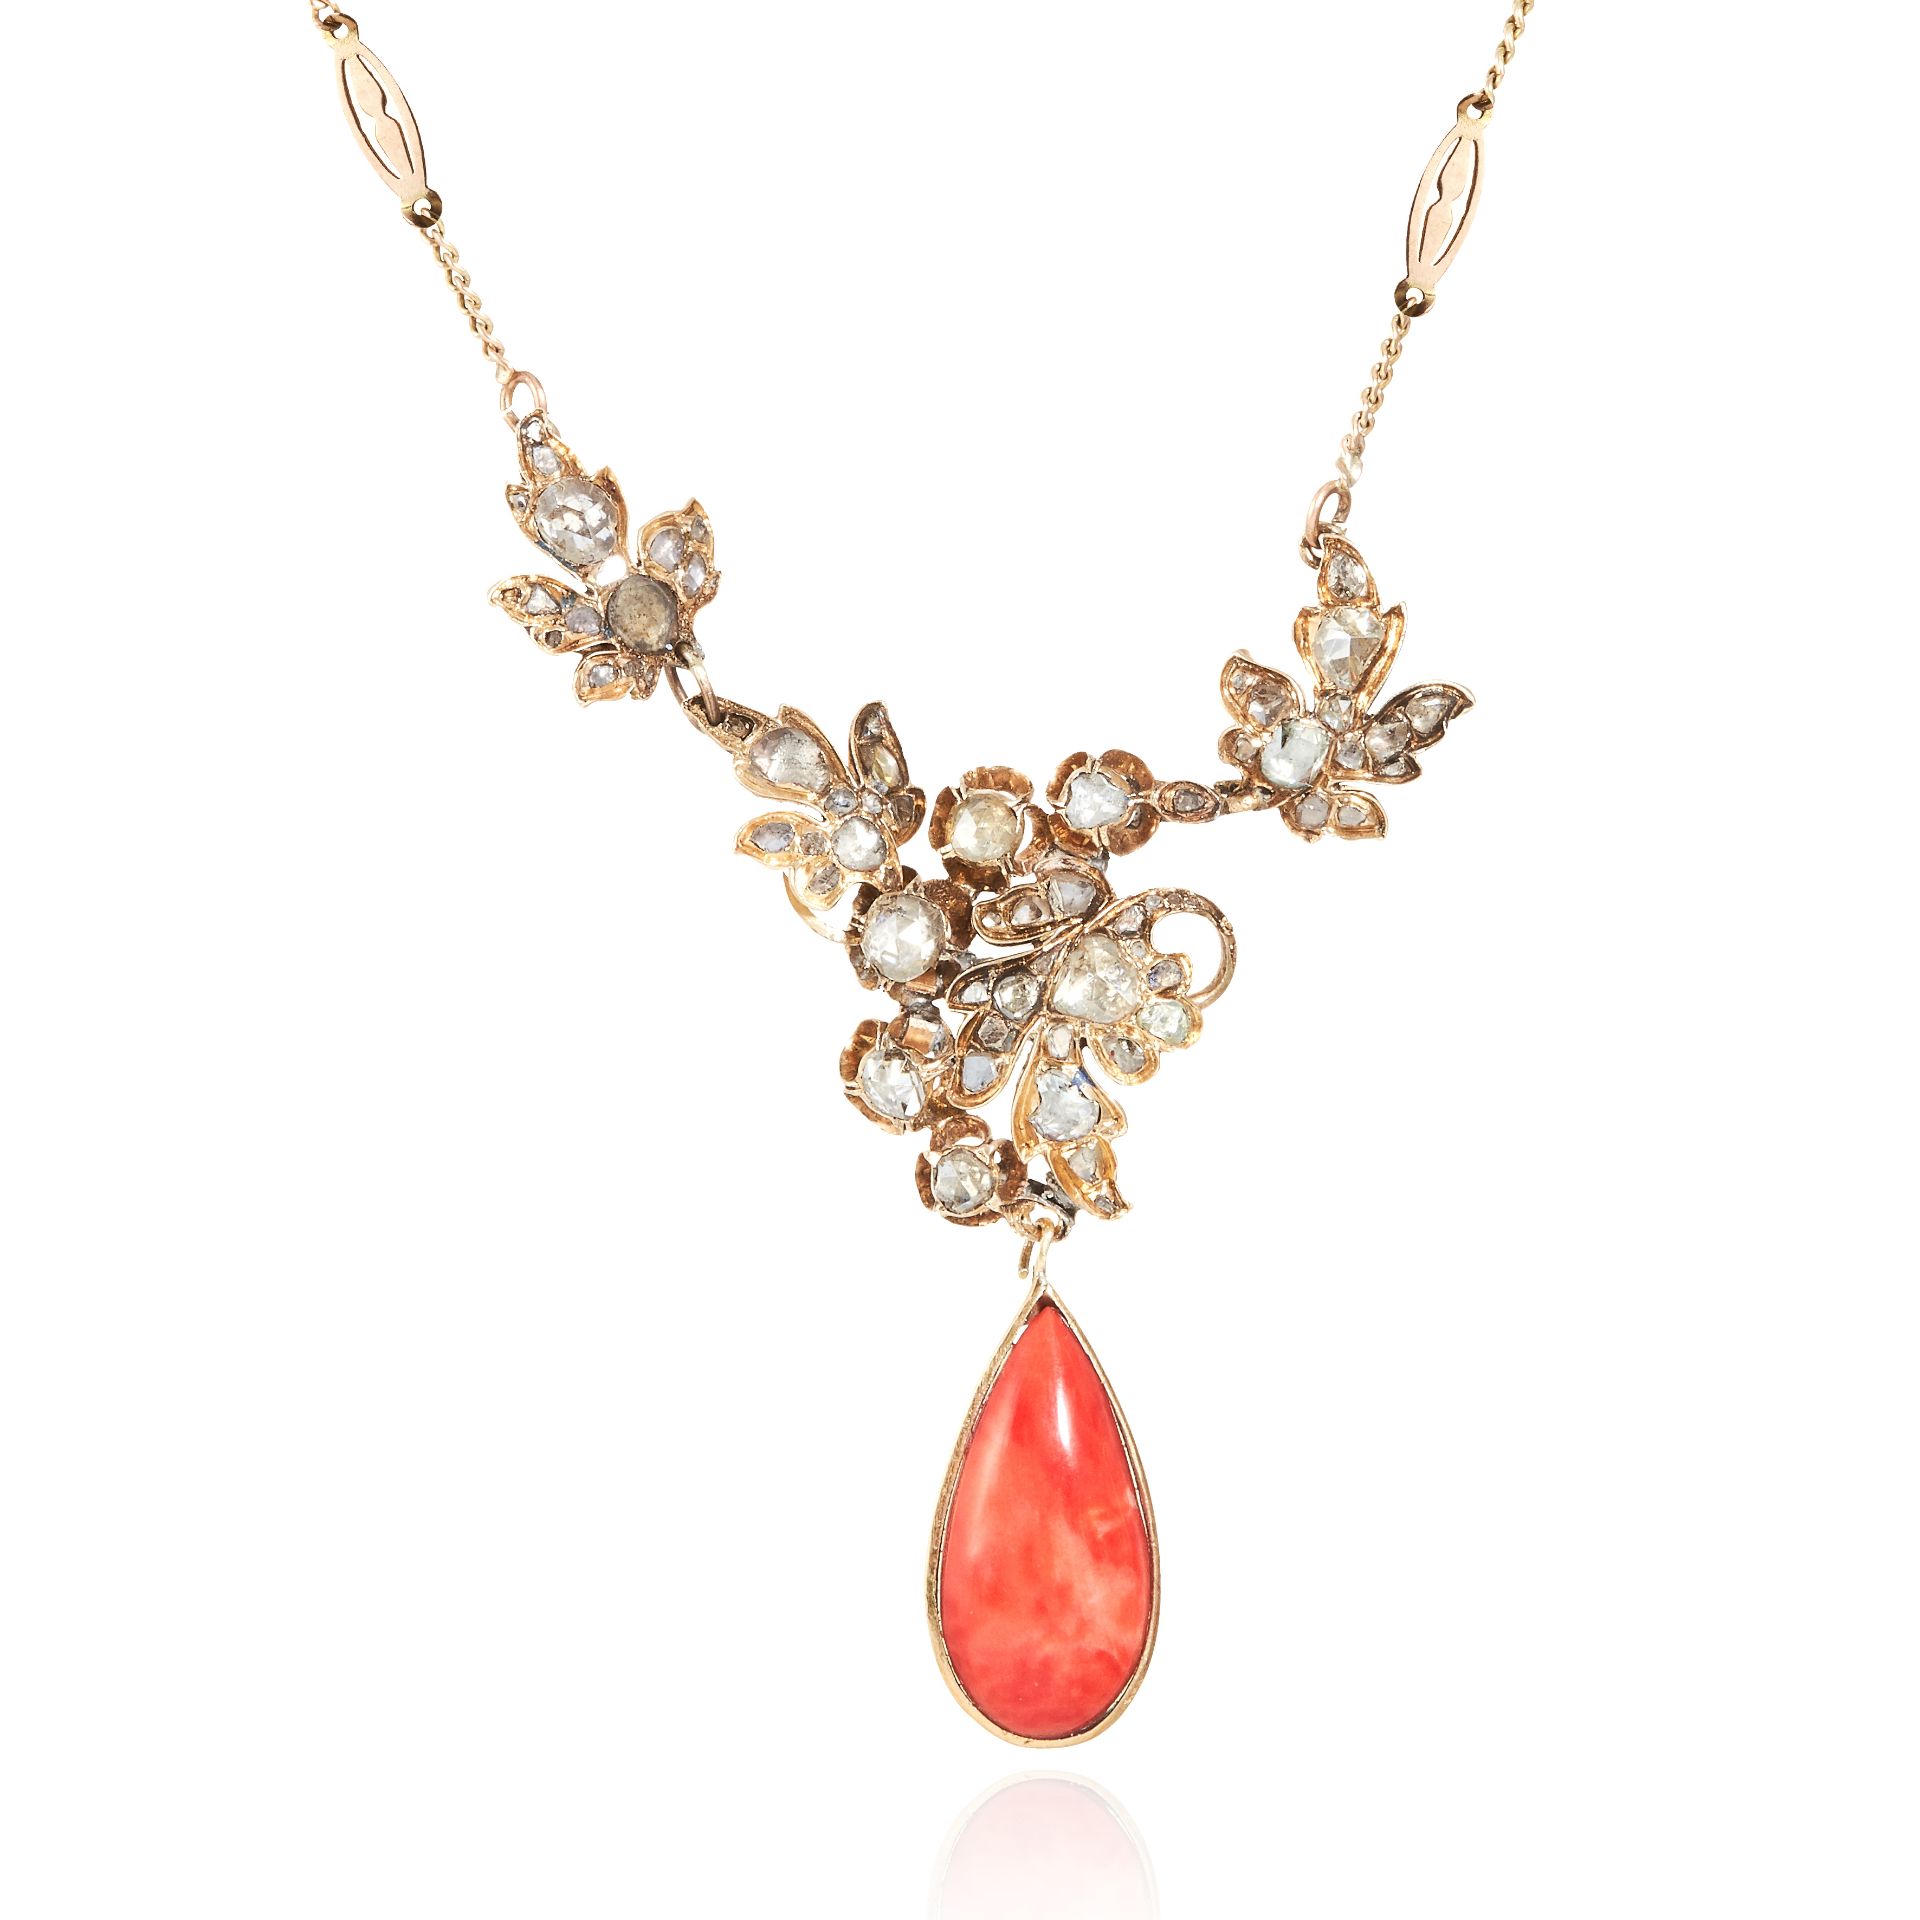 AN ANTIQUE CORAL AND DIAMOND NECKLACE, SPANISH 19TH CENTURY in yellow gold, the pear shaped coral